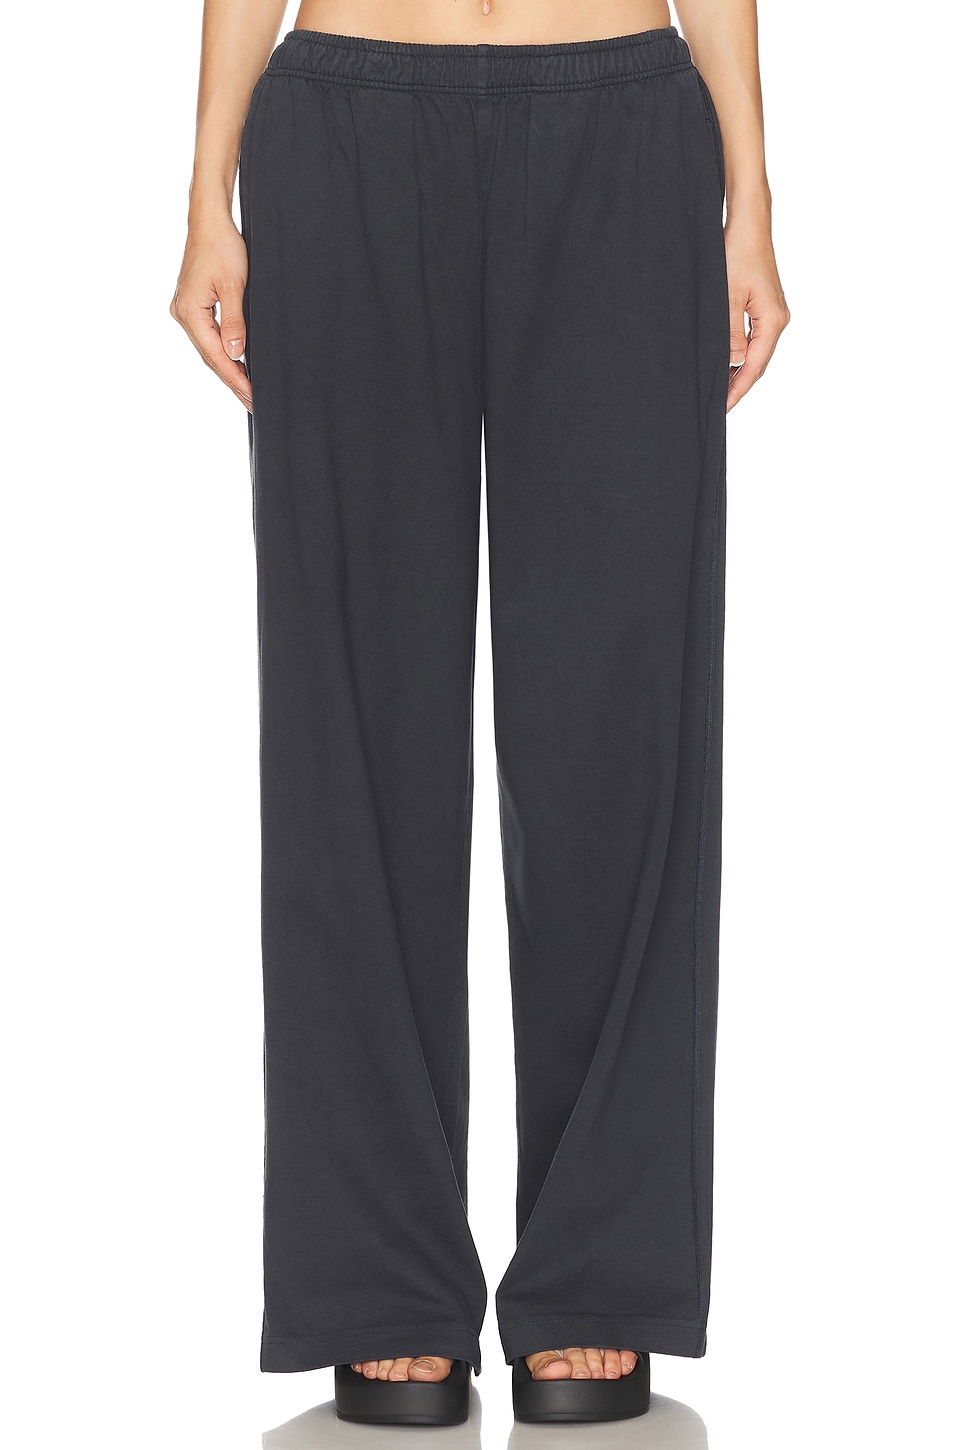 Image 1 of Acne Studios Midweight Sweatpant in Black